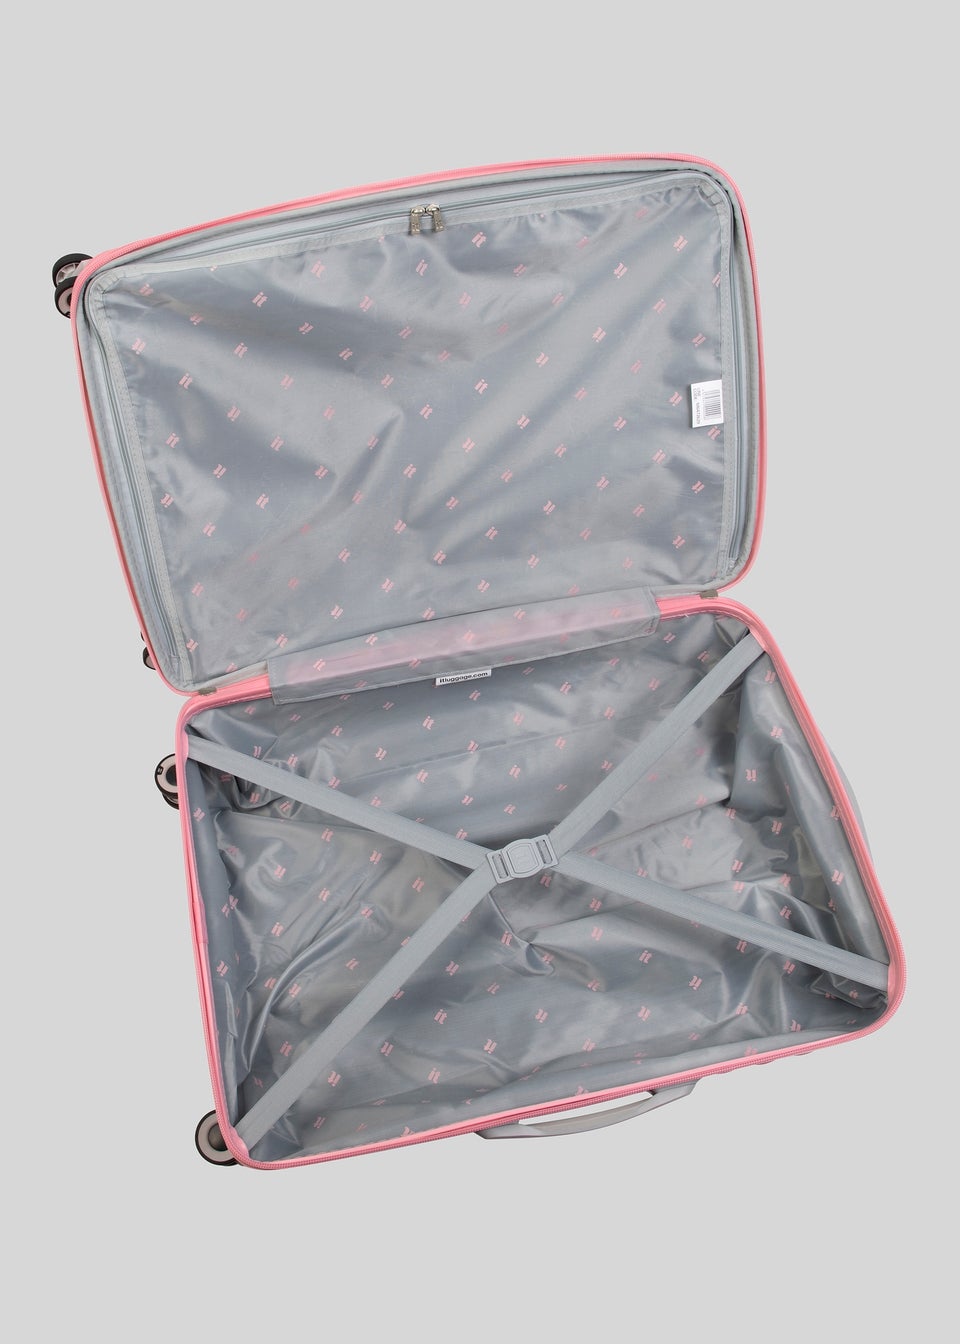 IT Luggage Pink Quilted Suitcase